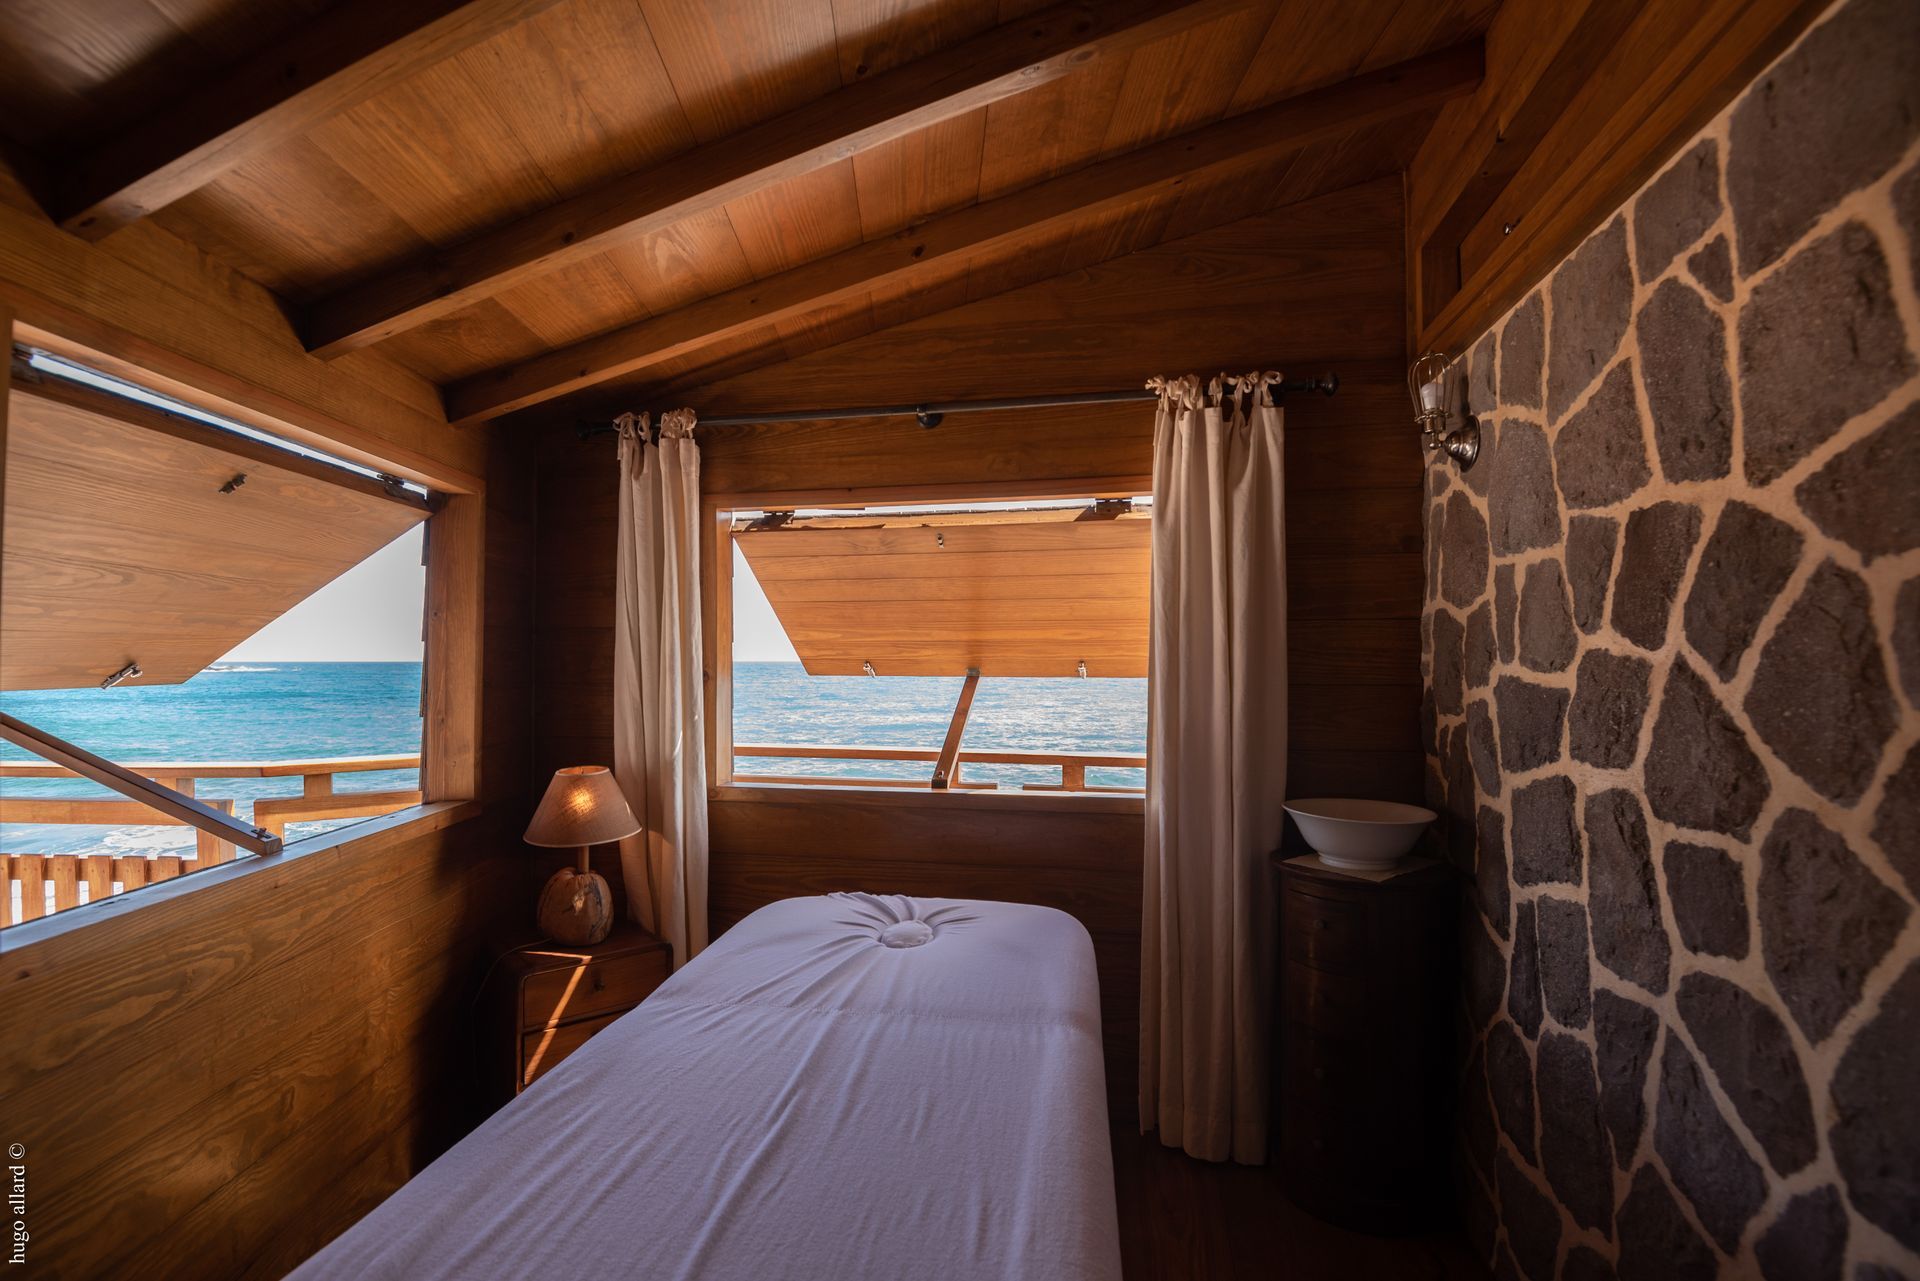 there is a massage table in the middle of the room with a view of the ocean